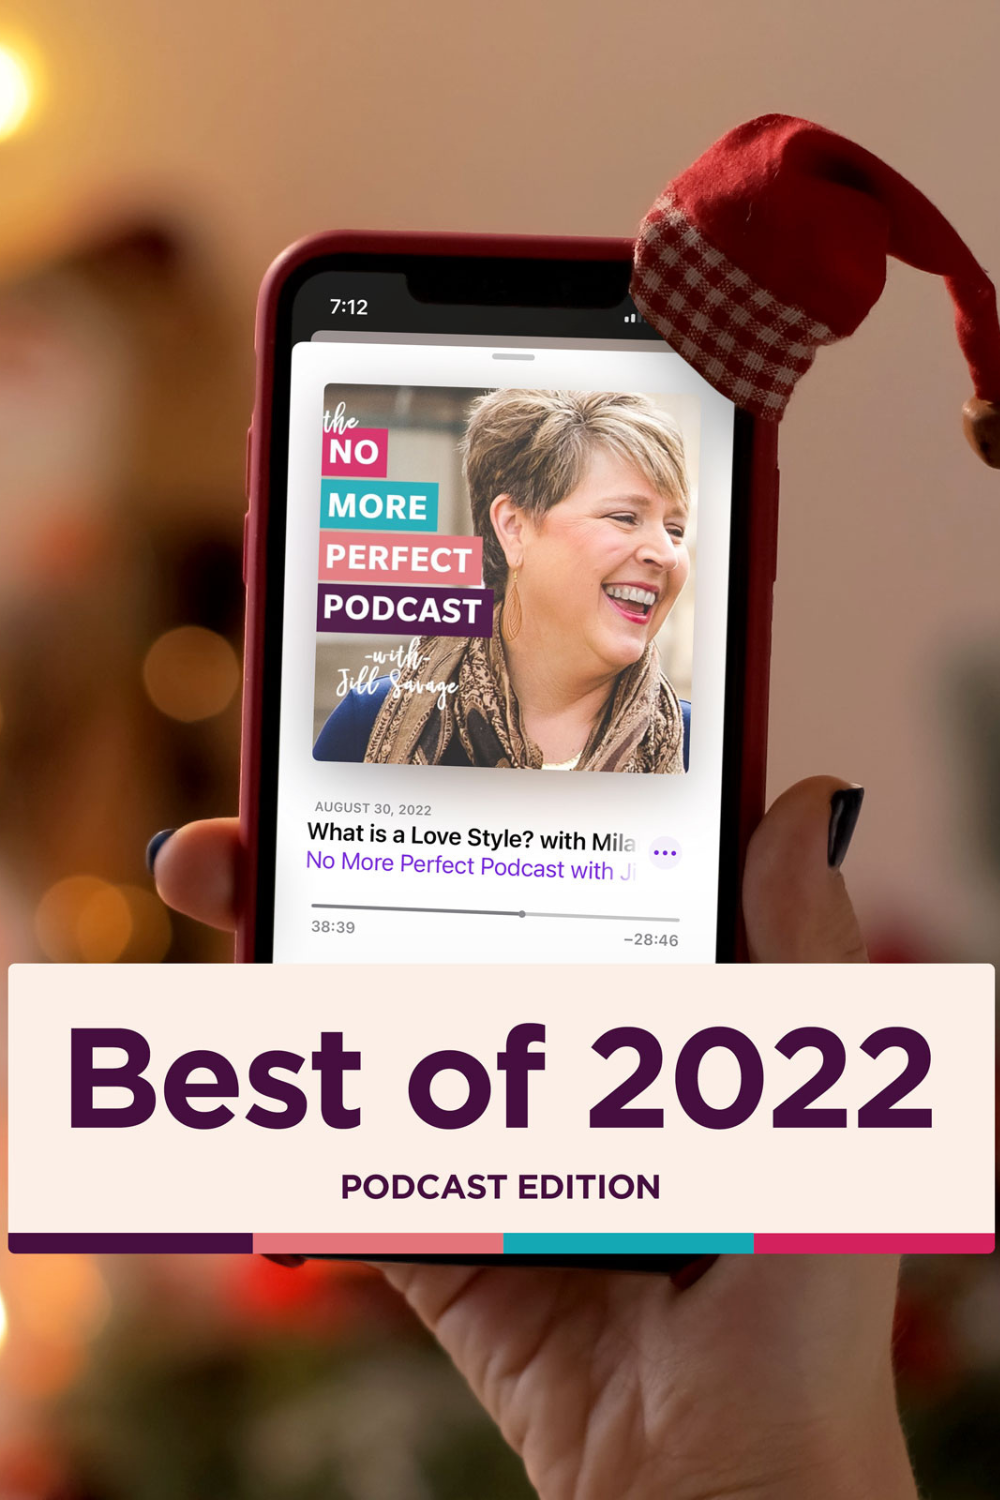 The Best of 2022: Podcast Edition